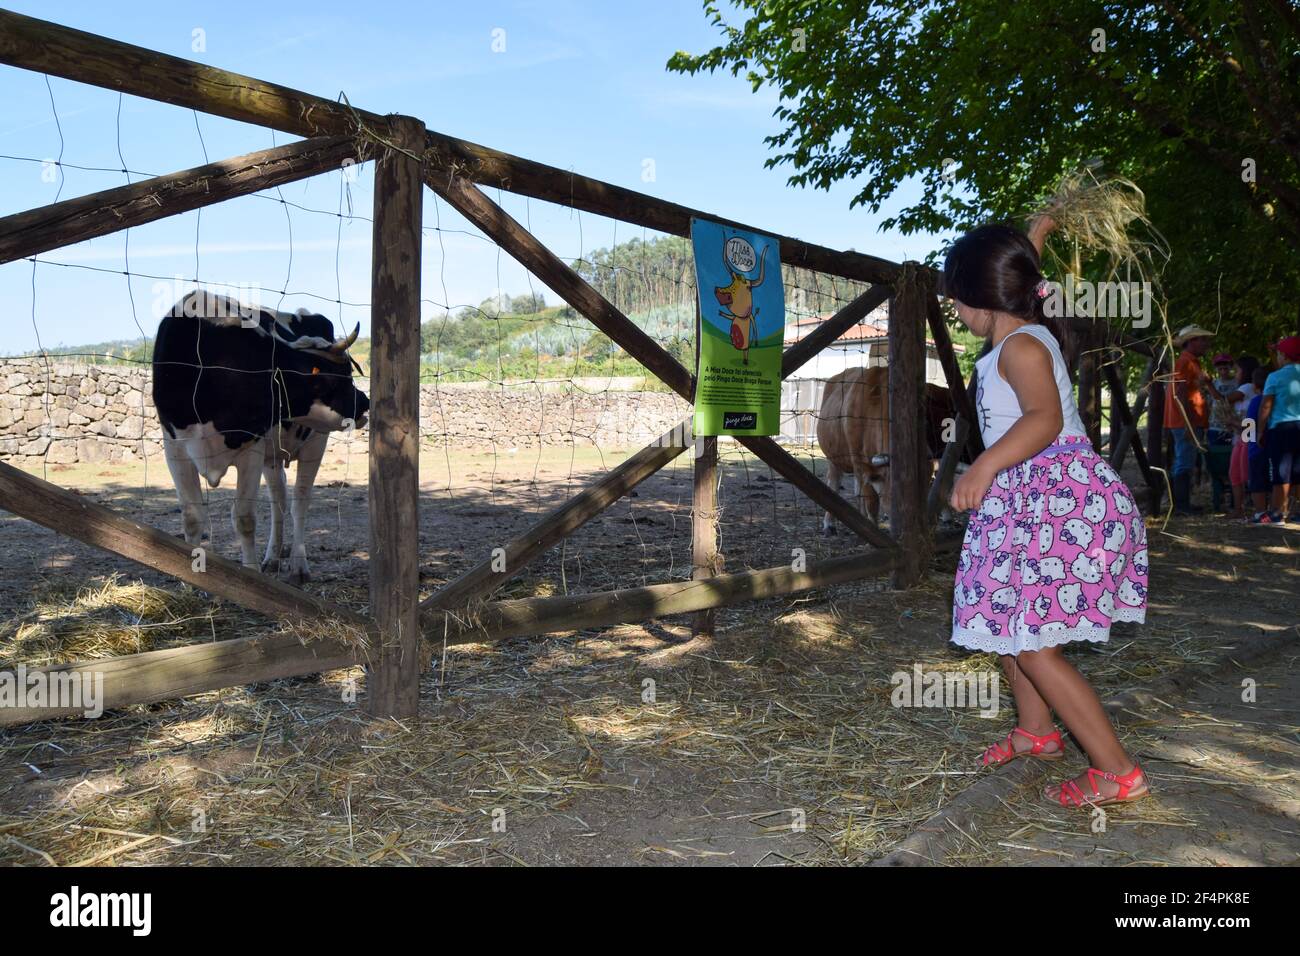 Young girl in pink dress at the farm learning how to feed a cow, cow looking at young girl. Rural experiences with animals in Quinta pedagógica Braga. Stock Photo